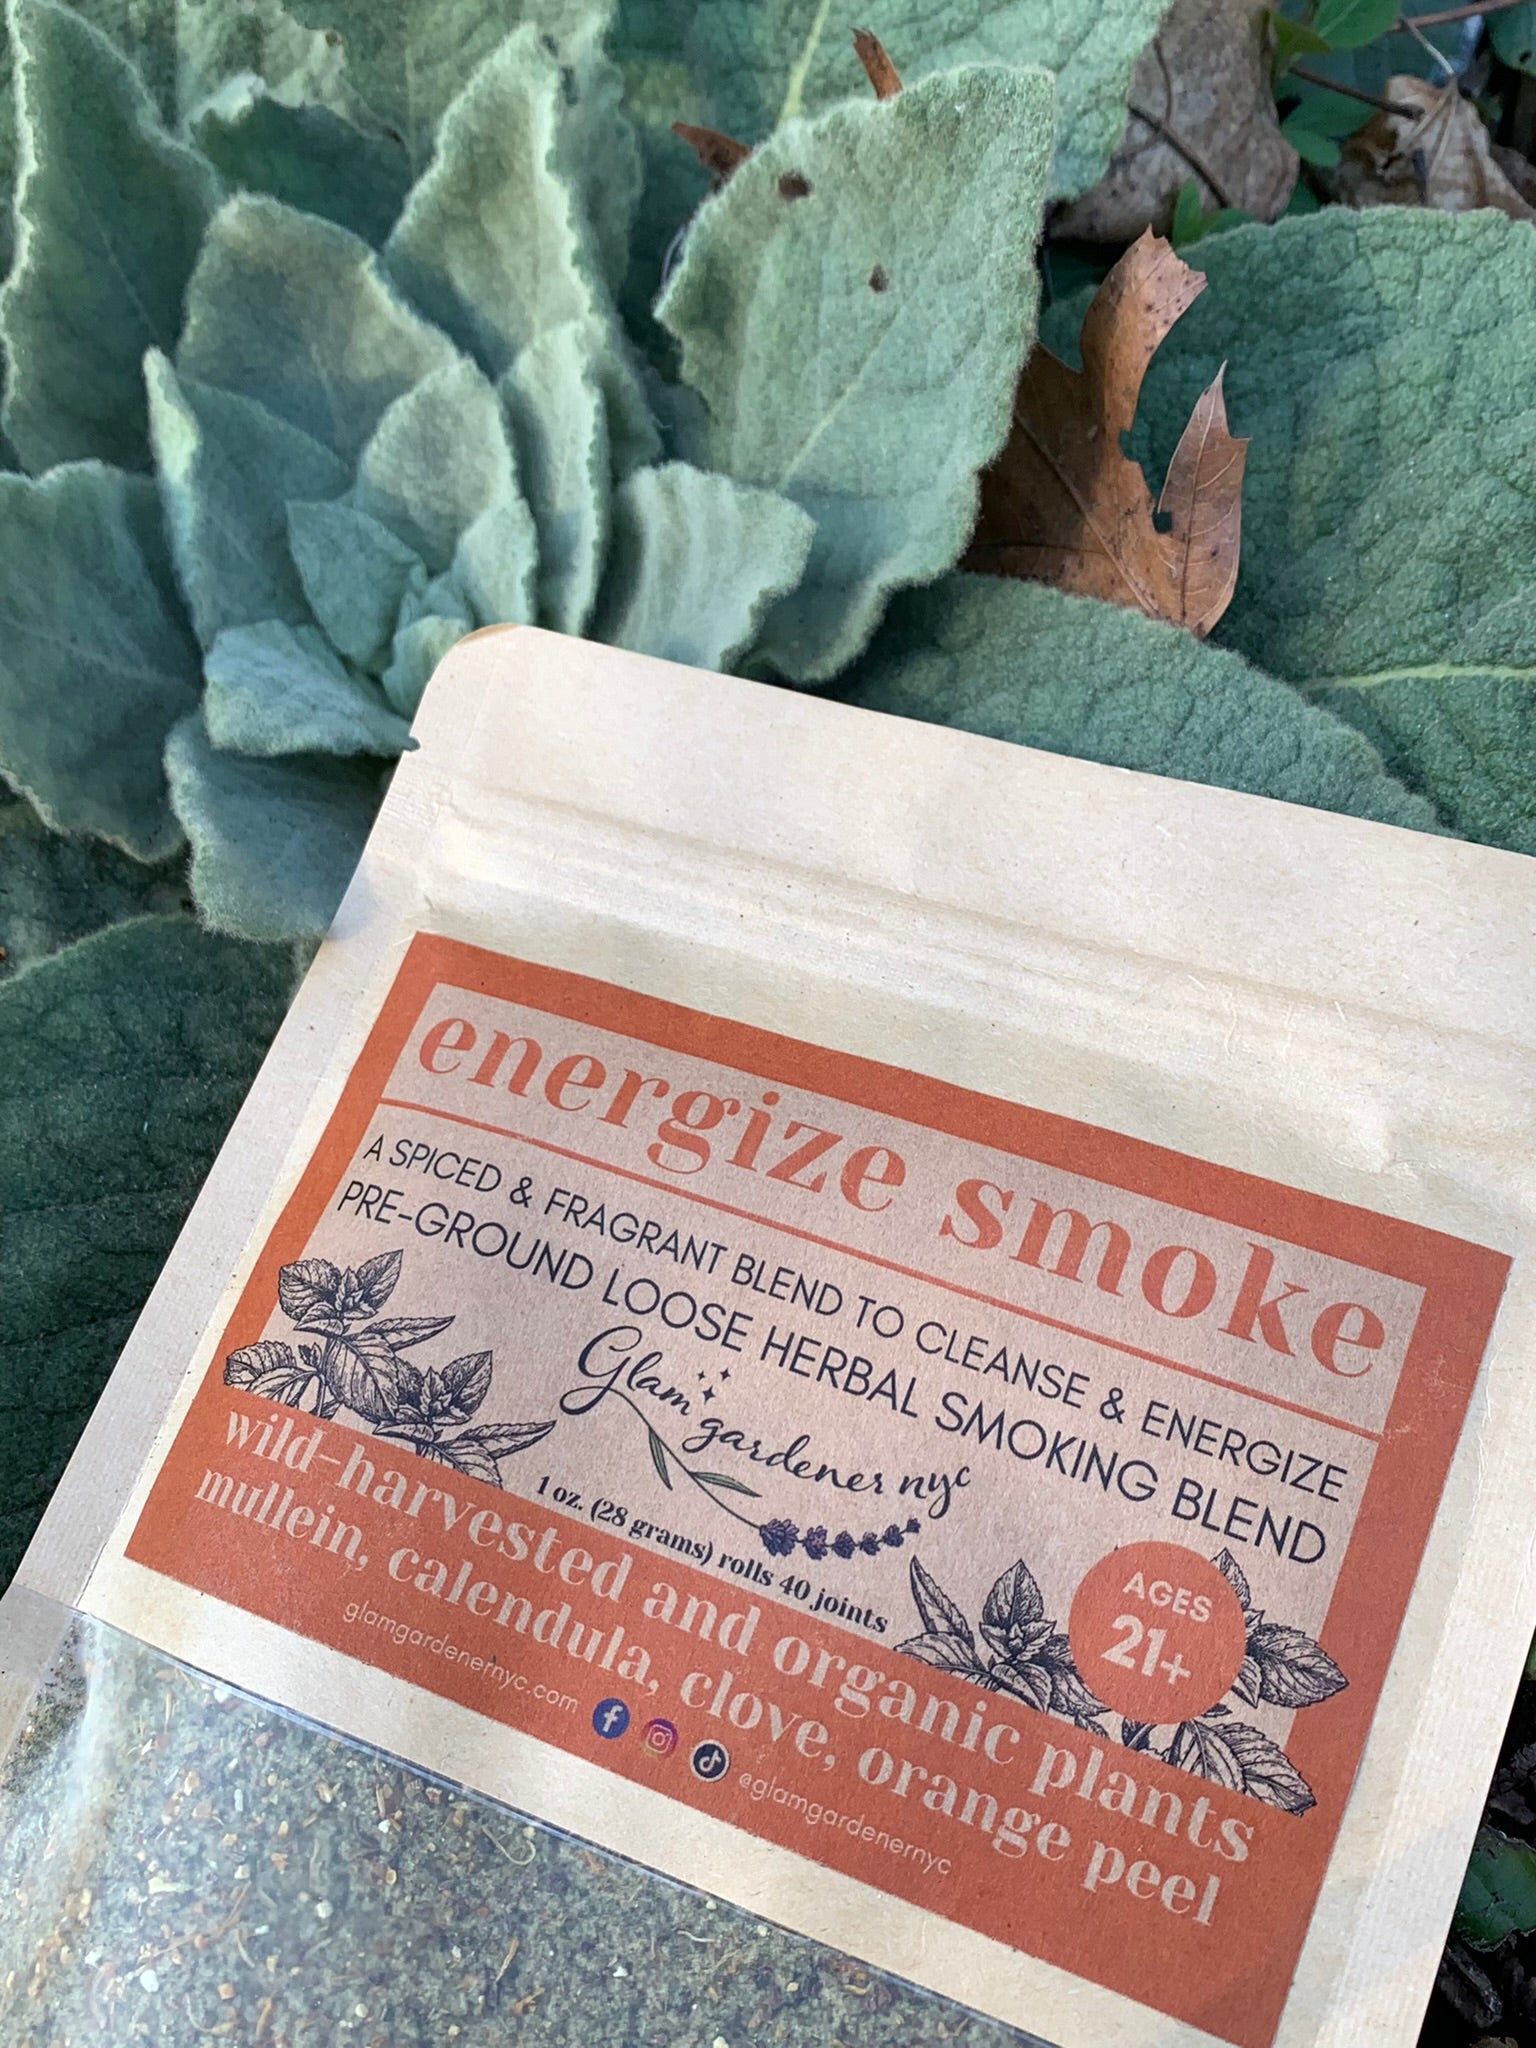 energizing smoke blend with organic and wild harvested plants by glam gardener nyc organic calendula mullein clove and orange peel 2